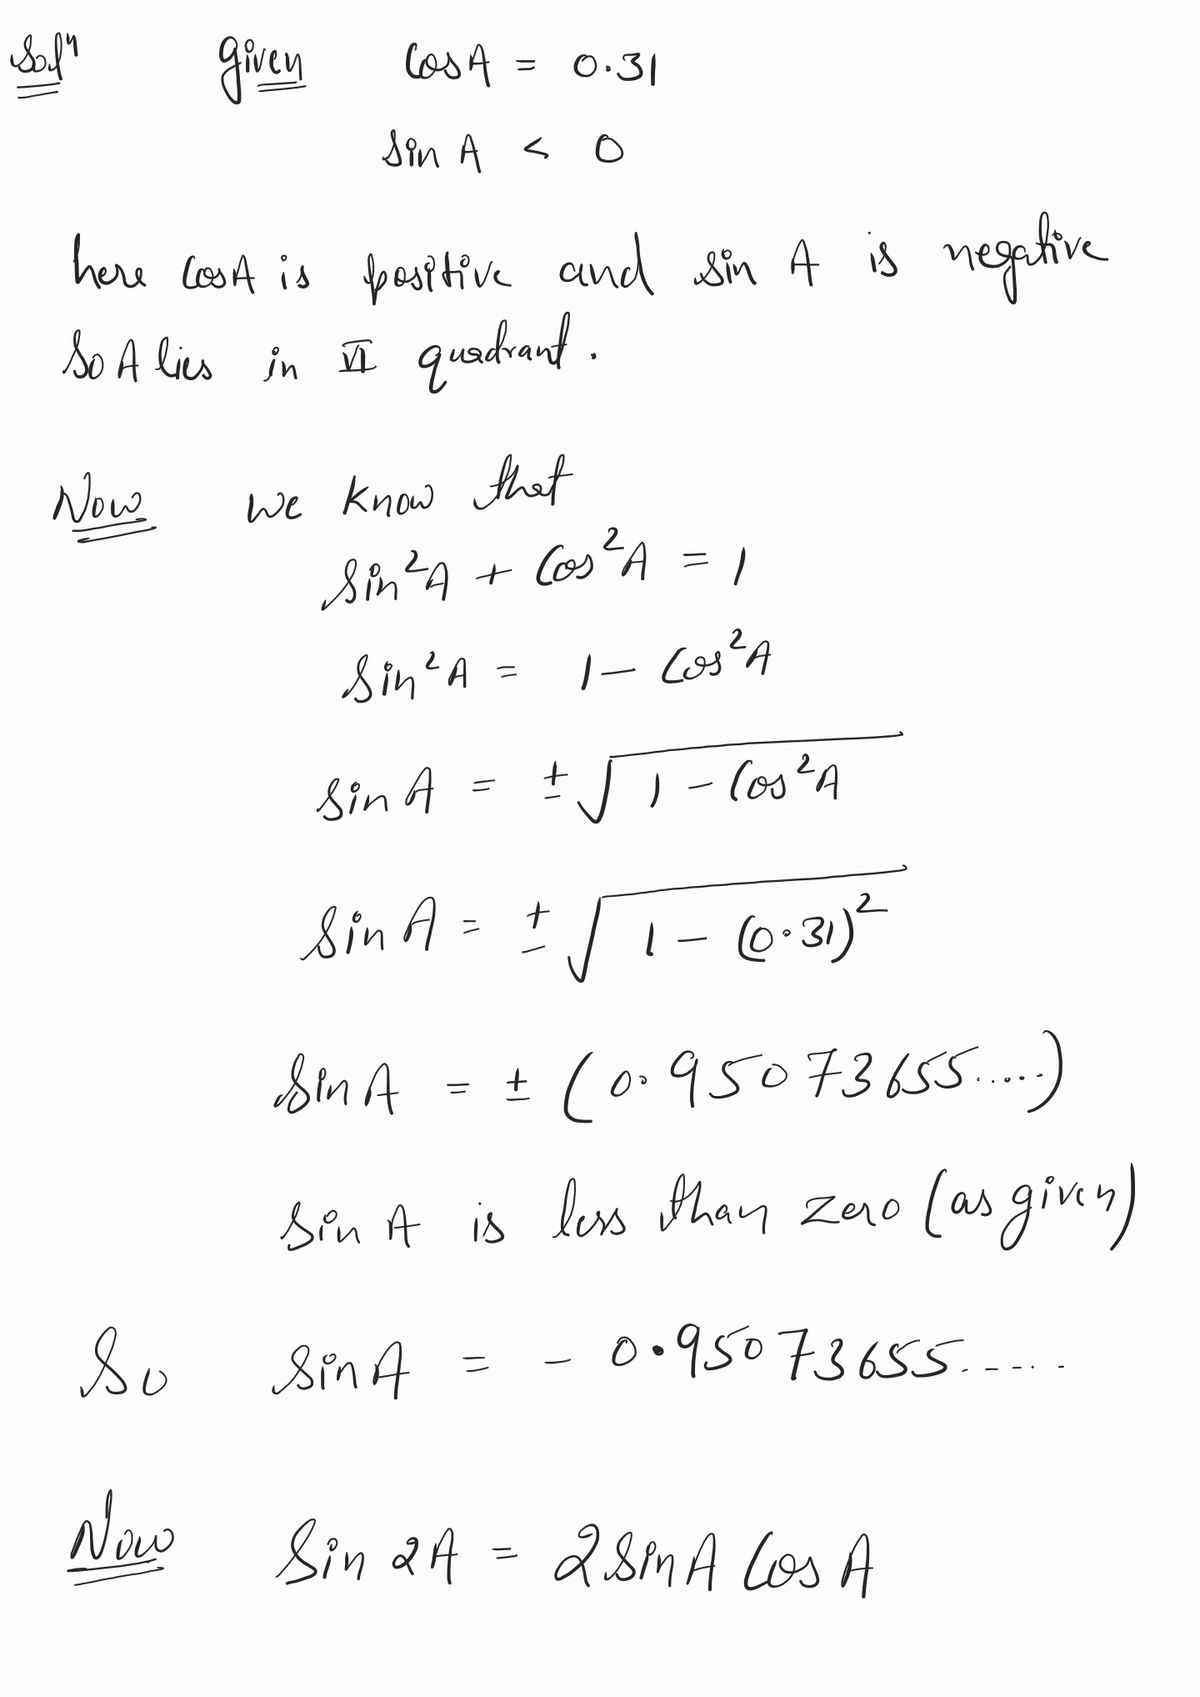 Answered: Given cos A u003d 0.31 and sin A u003c 0